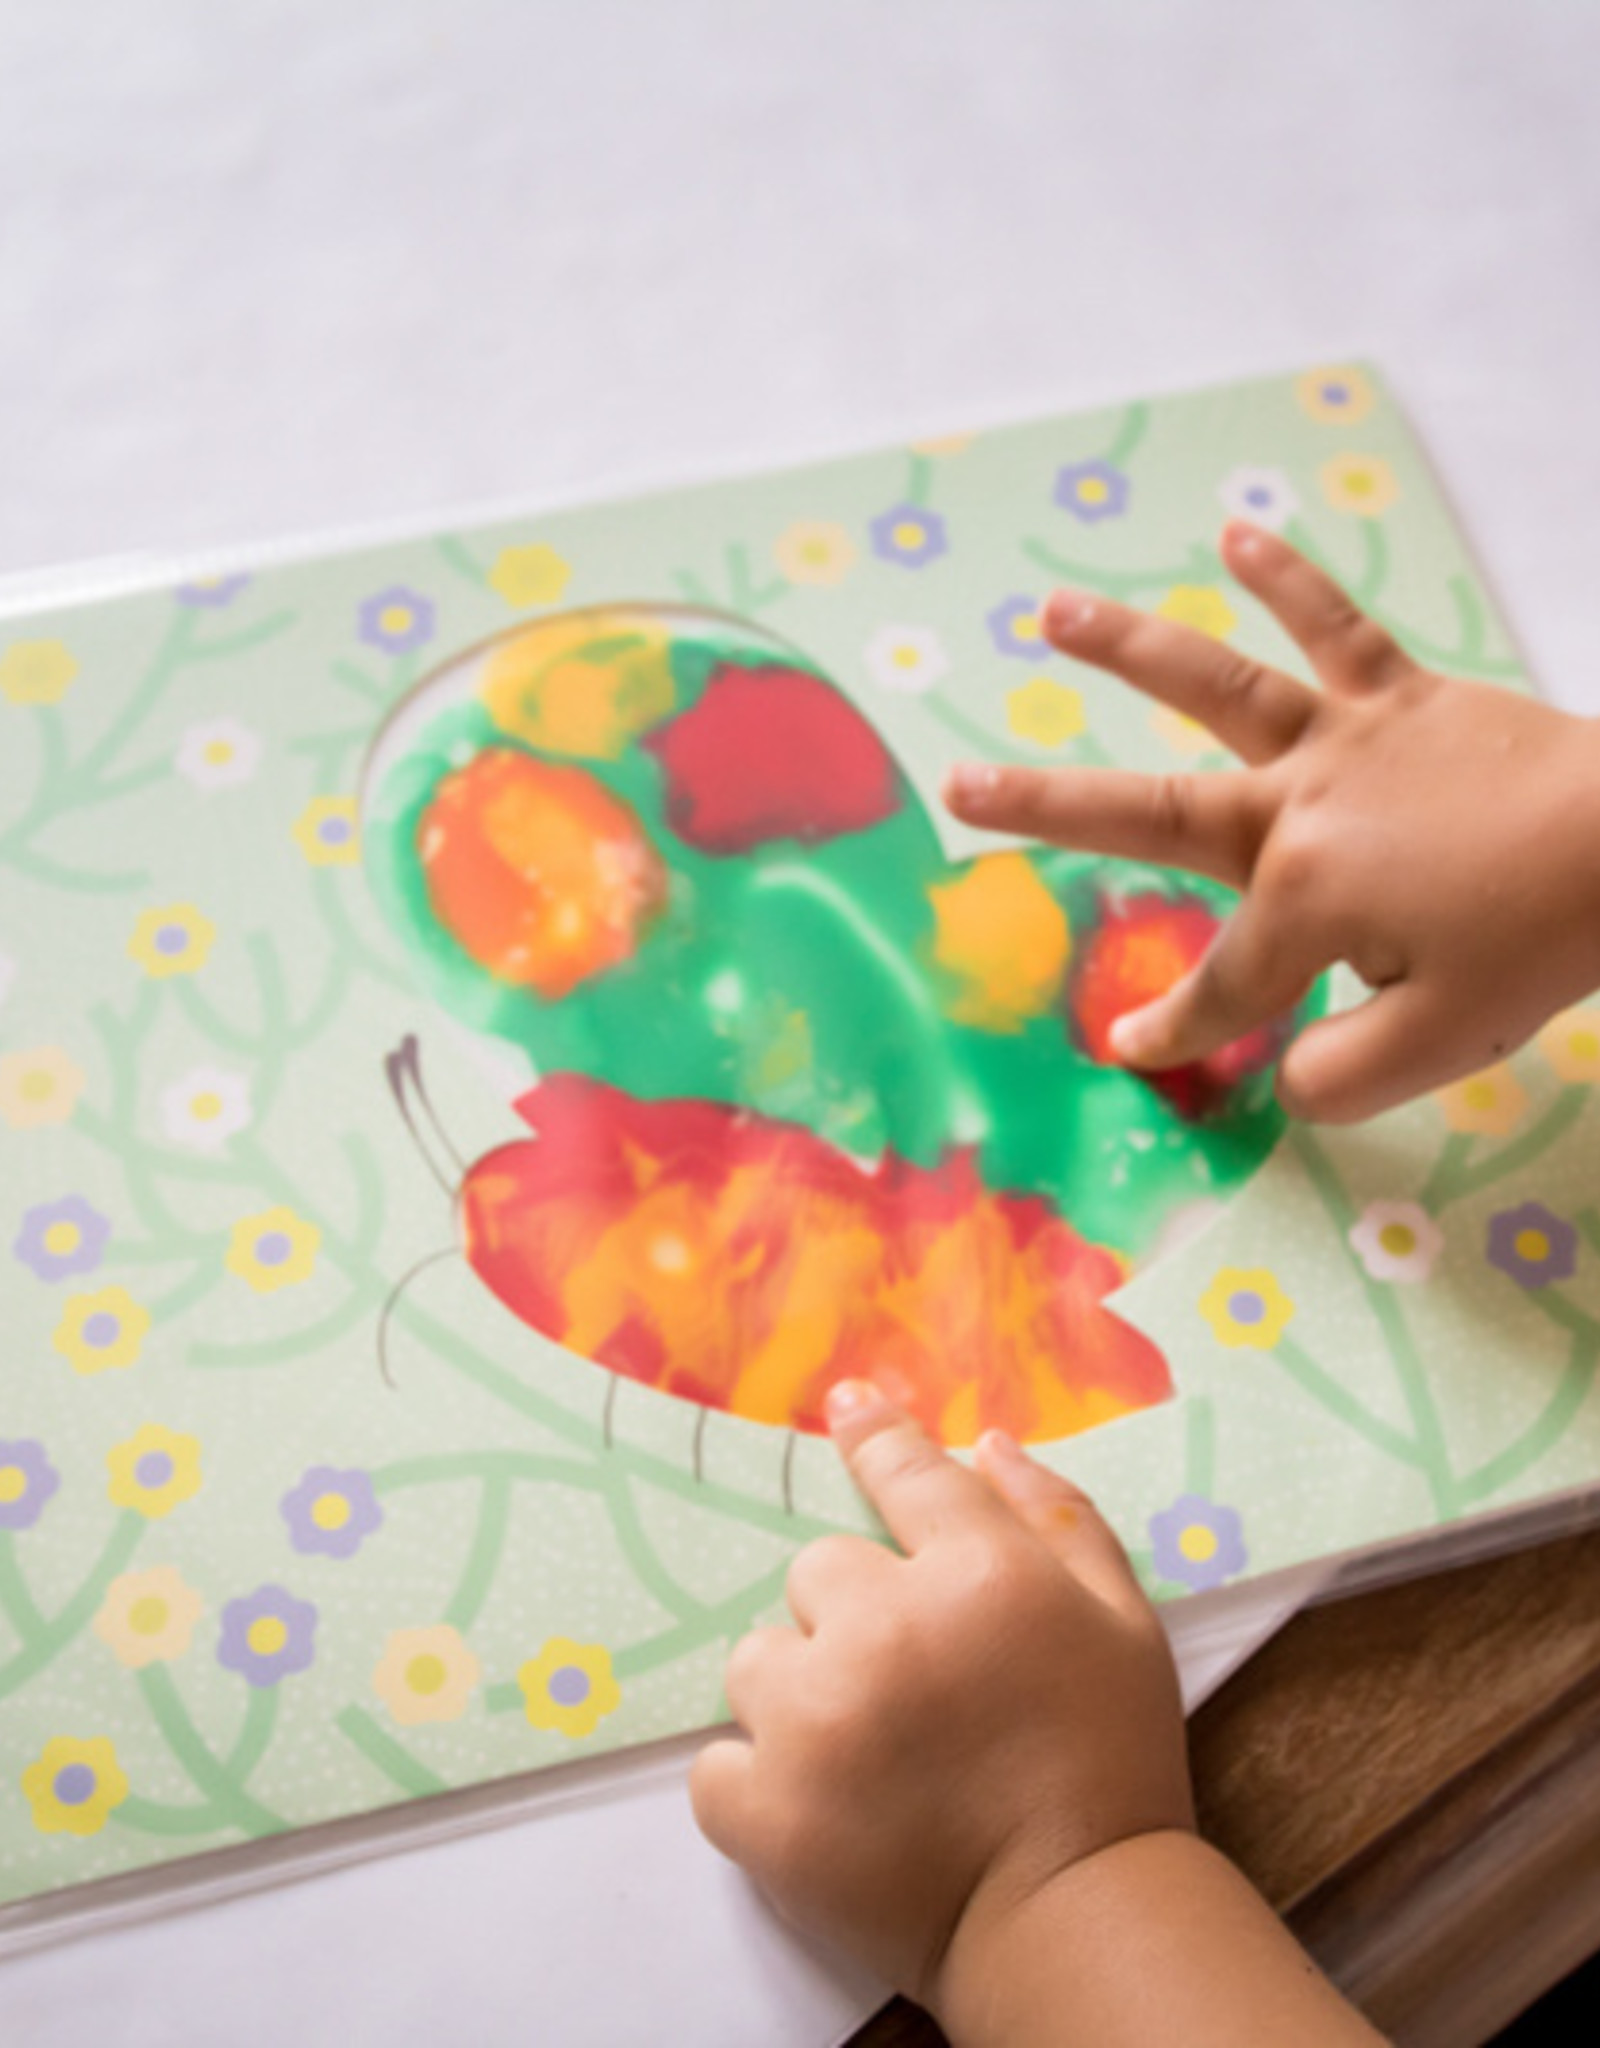 Djeco Djeco - Squirt And Spread Painting Set